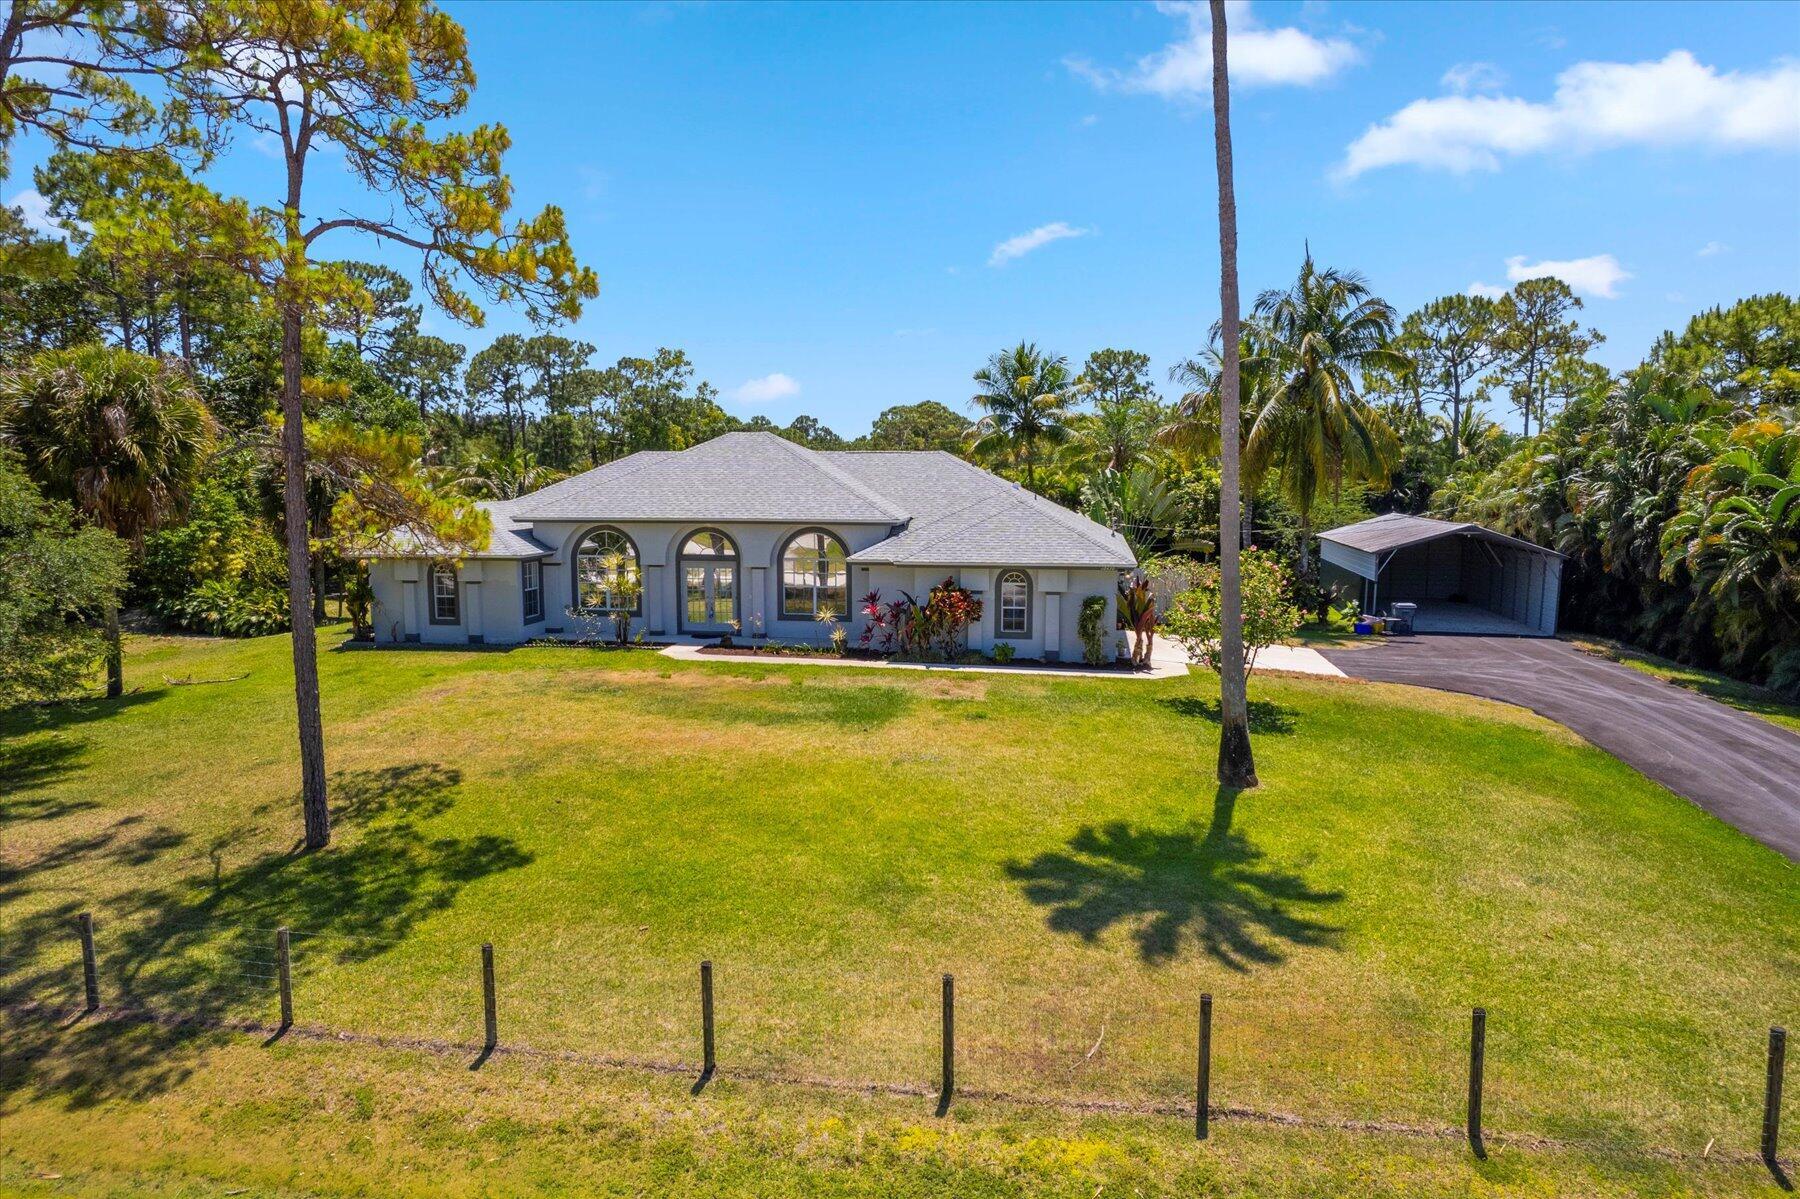 Lovely home on 1.15 acres, 3 beds 3 full baths.  Stainless Steel appliances, RO water system.  Pond and Pool, Fruit trees, 2 Wells, Sprinkler System, Roof was done in 2018, AC in 2022, Water Heater in 2022.  Boat Port could easily be turned into a shop. Paved driveway.